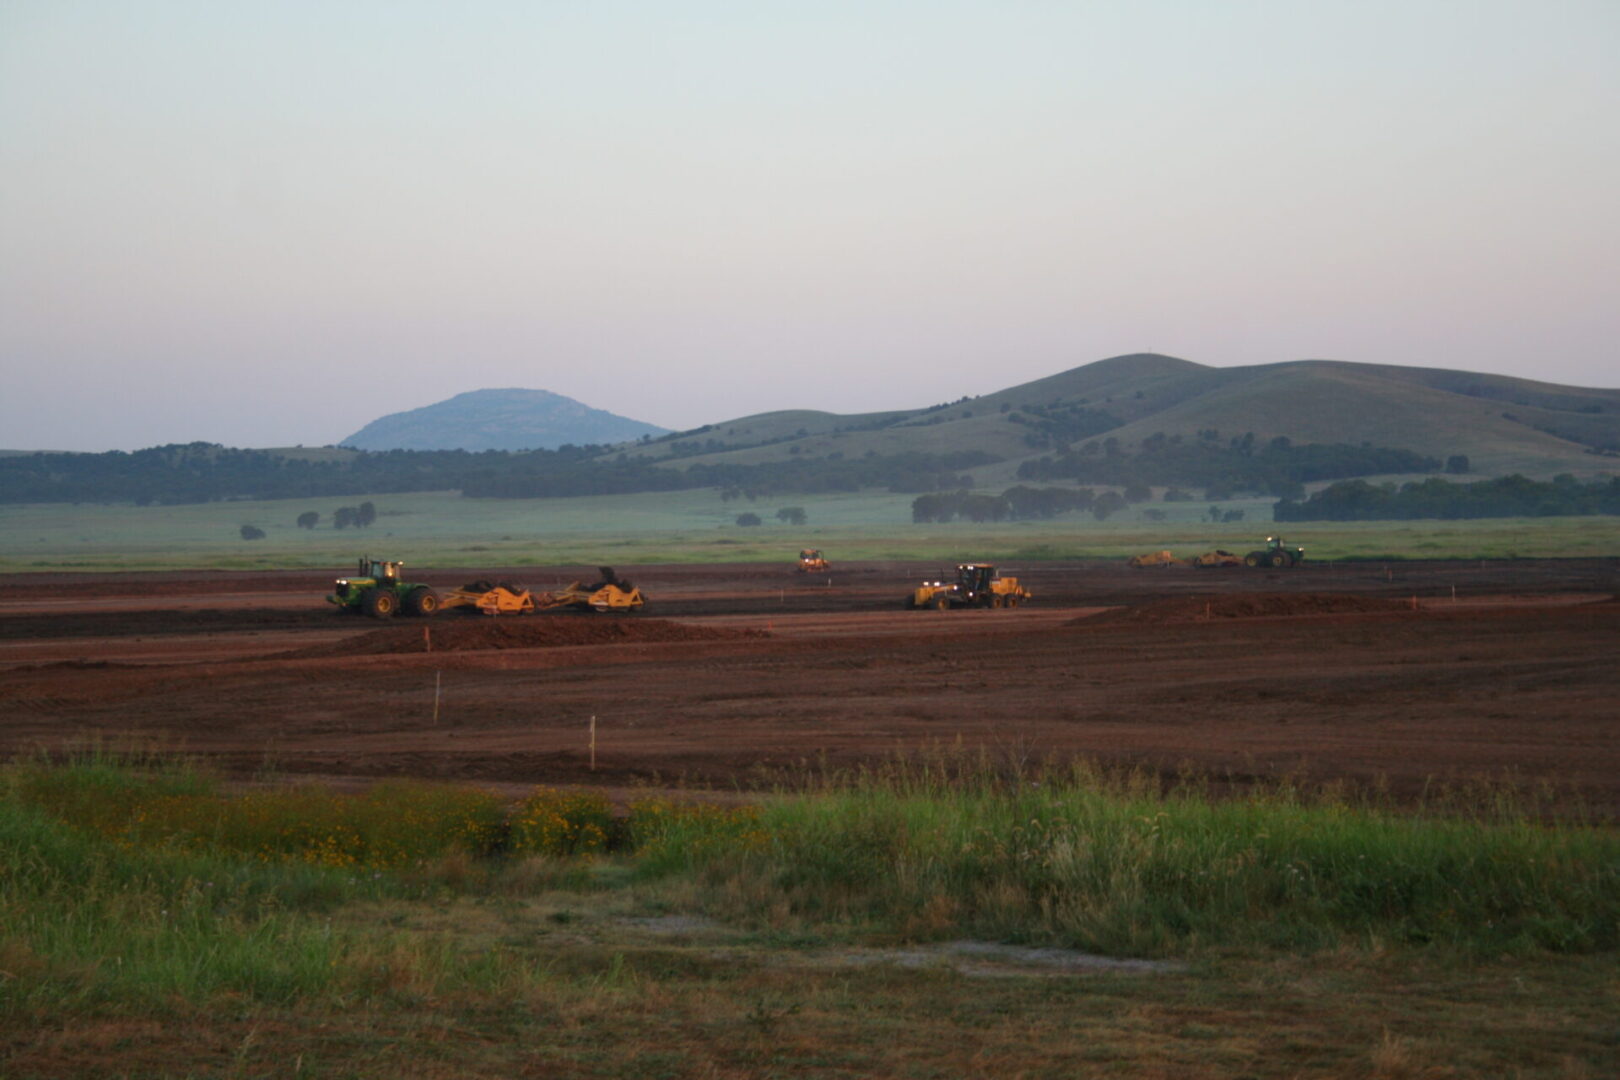 Tractors working on a construction site at dusk with hills in the background.